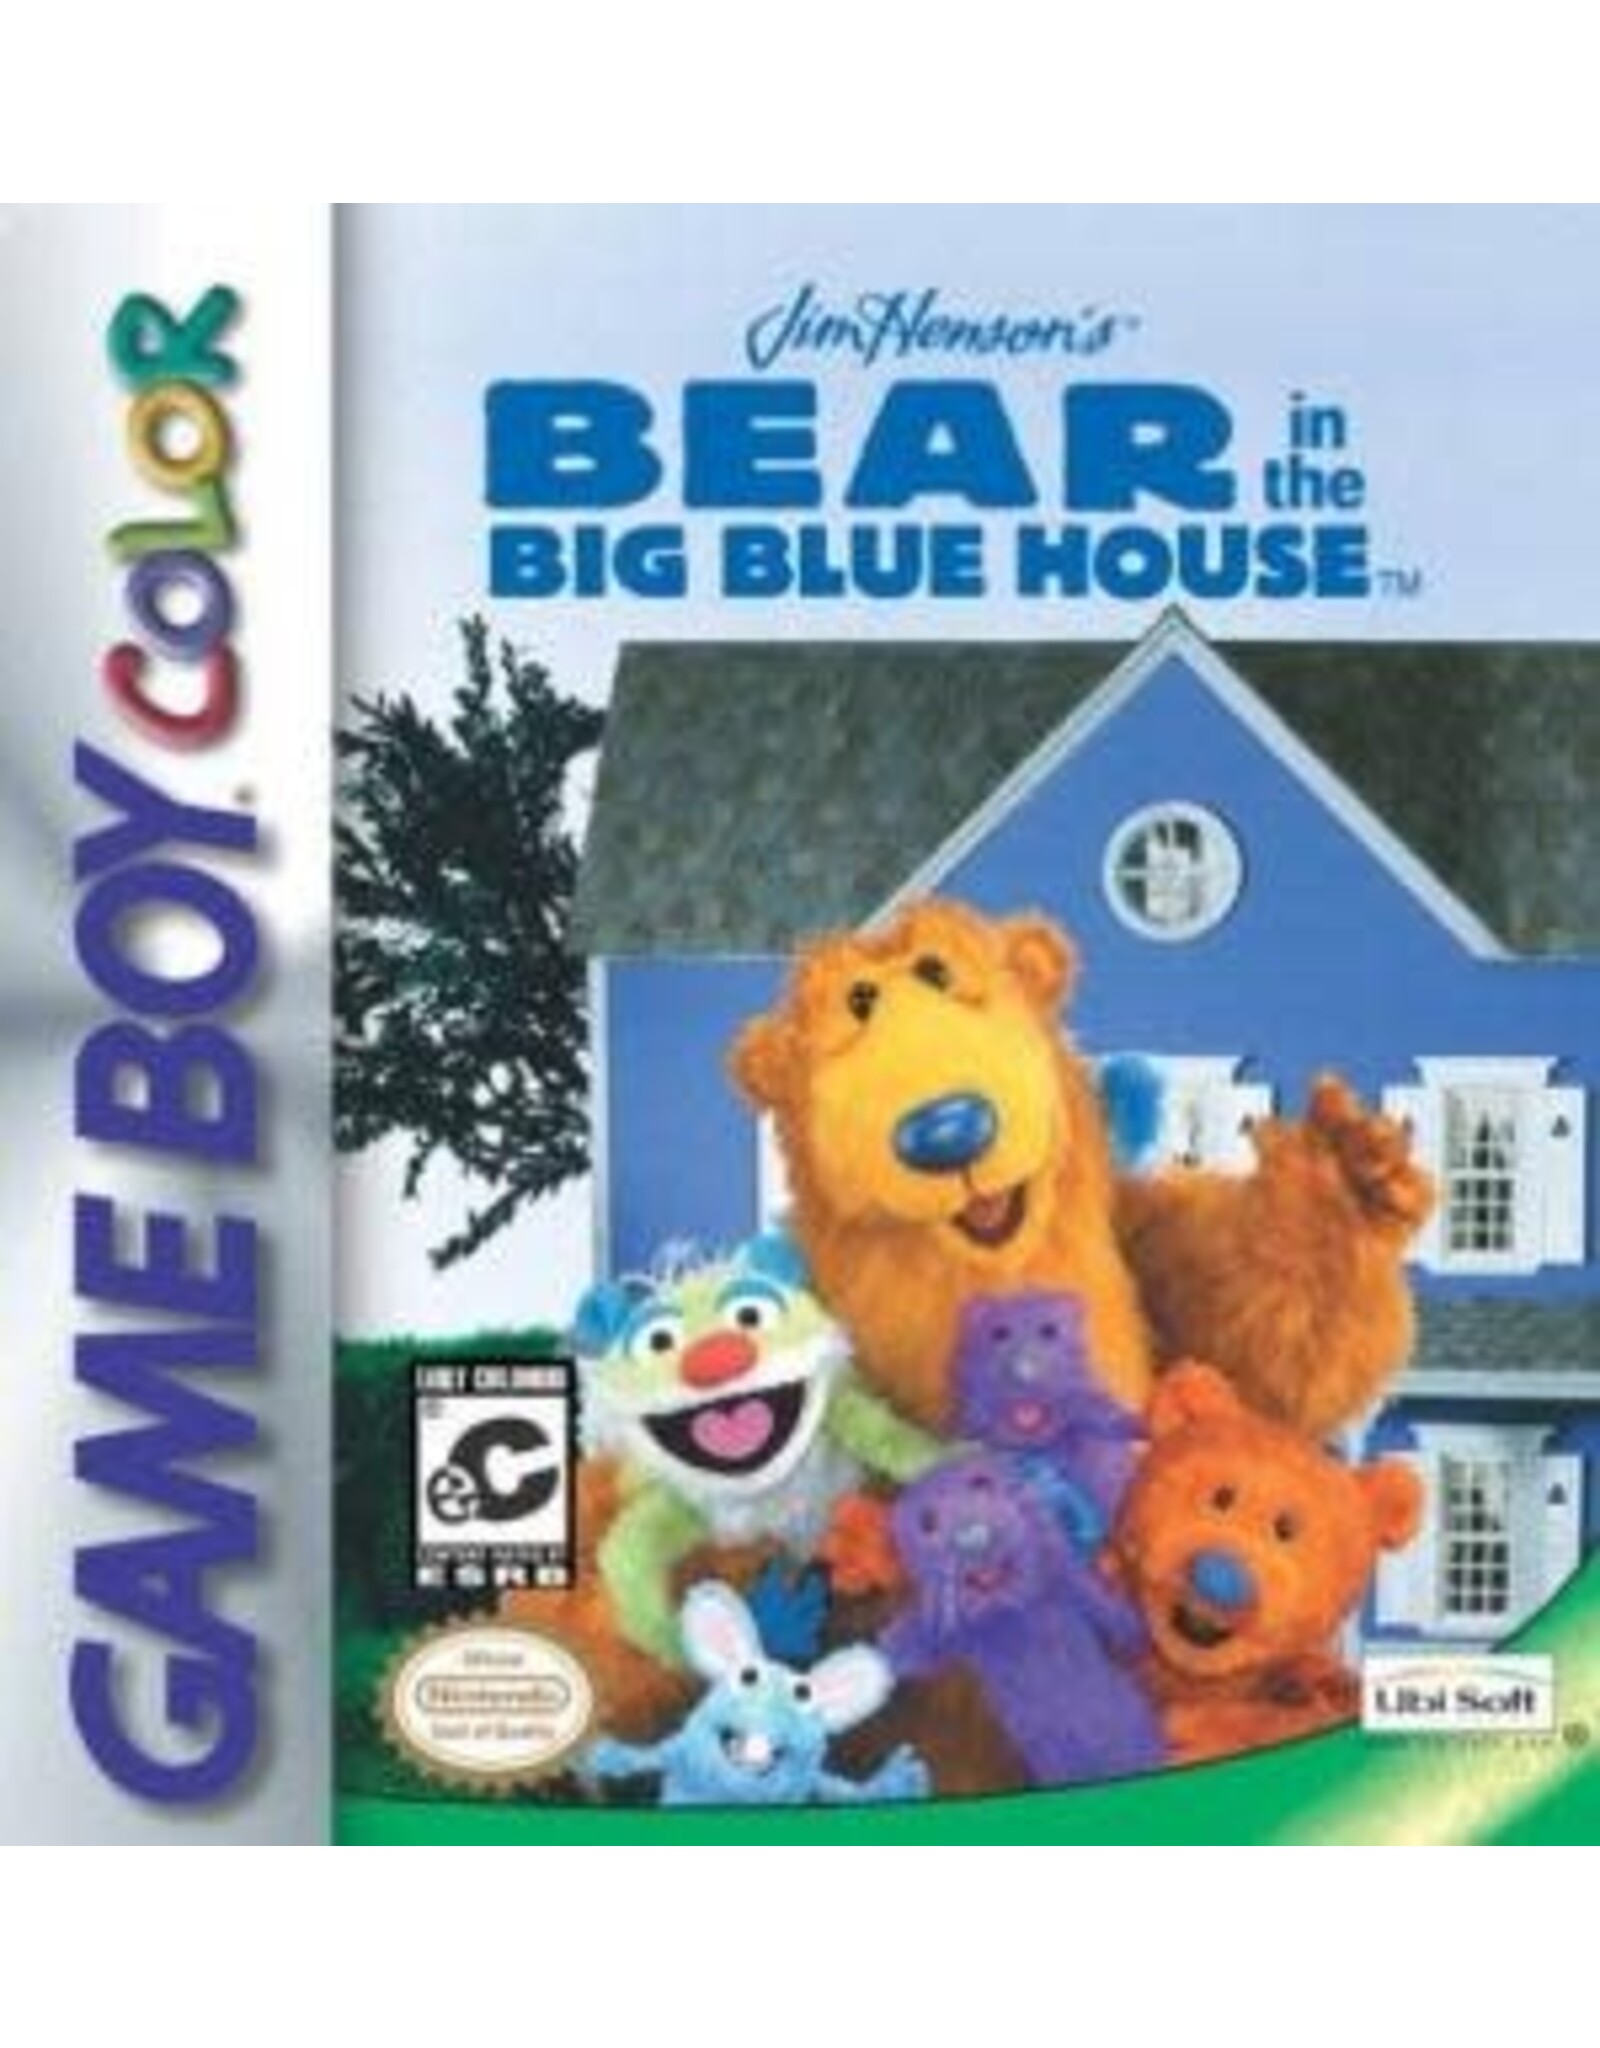 Game Boy Color Jim Henson's Bear in the Big Blue House (Cart Only)